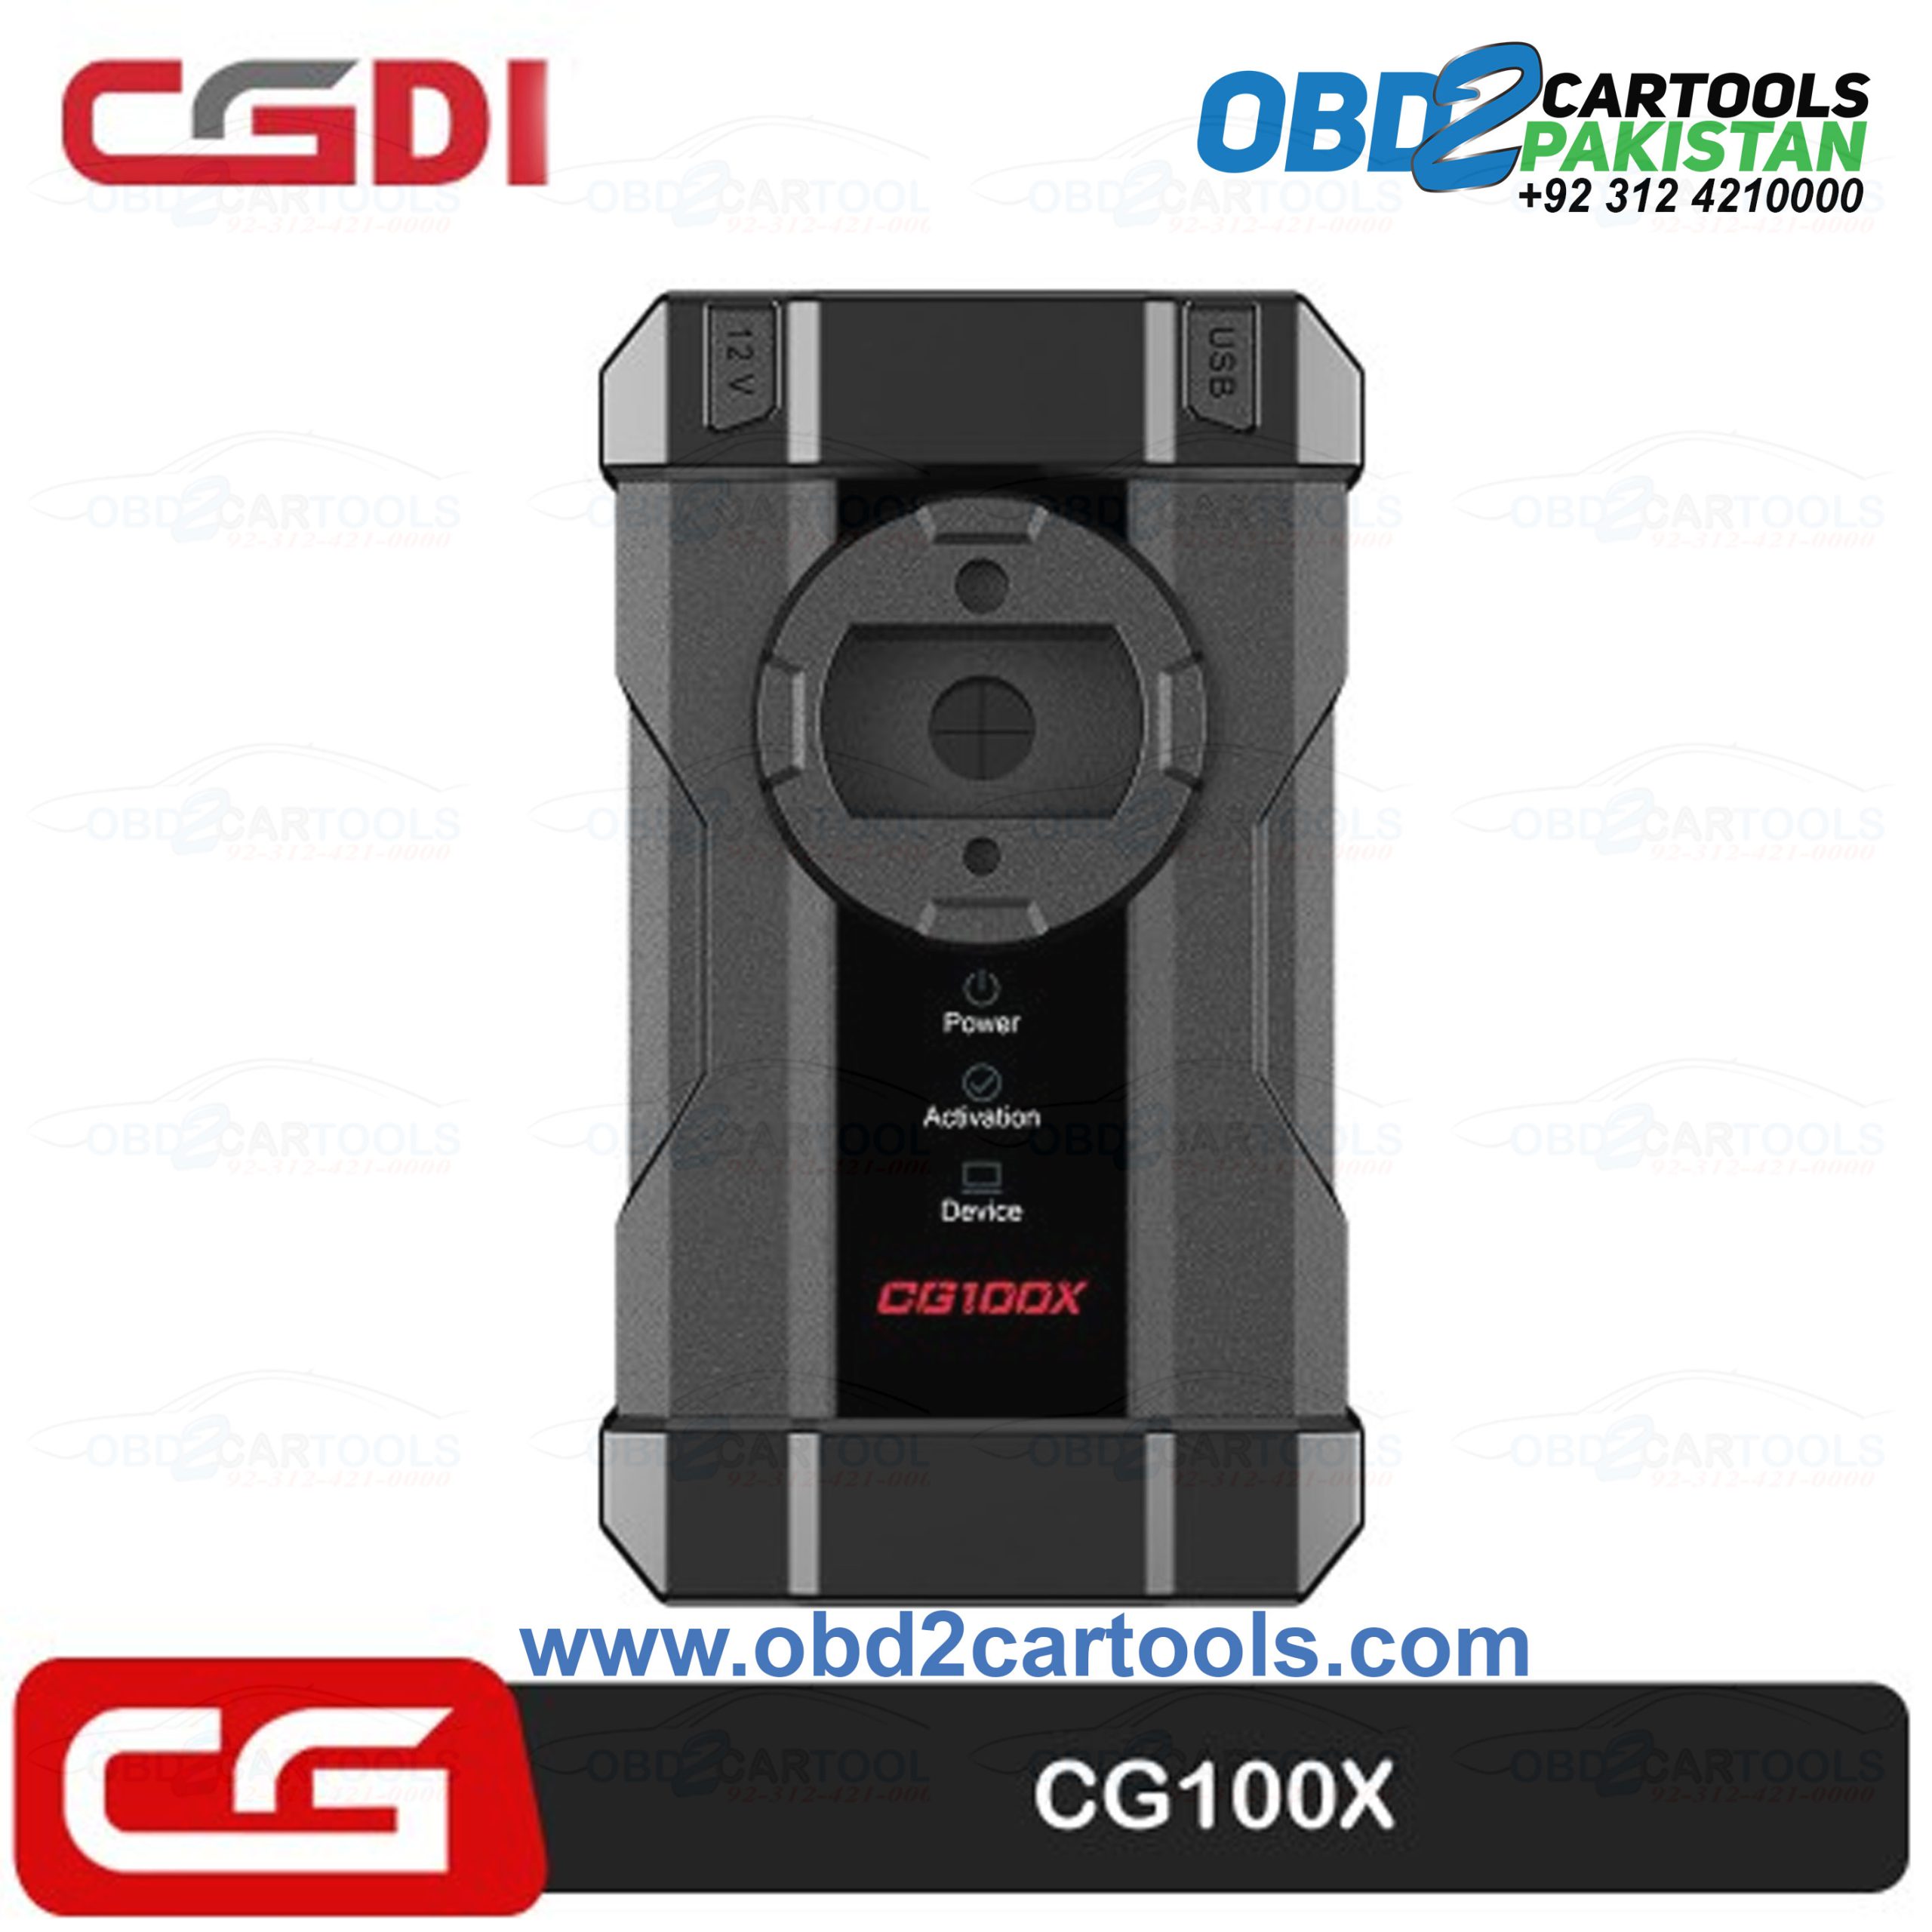 Product image for Newest CGDI CG100X New Generation Programmer for Airbag Reset Mileage Adjustment and Chip Reading Support MQB